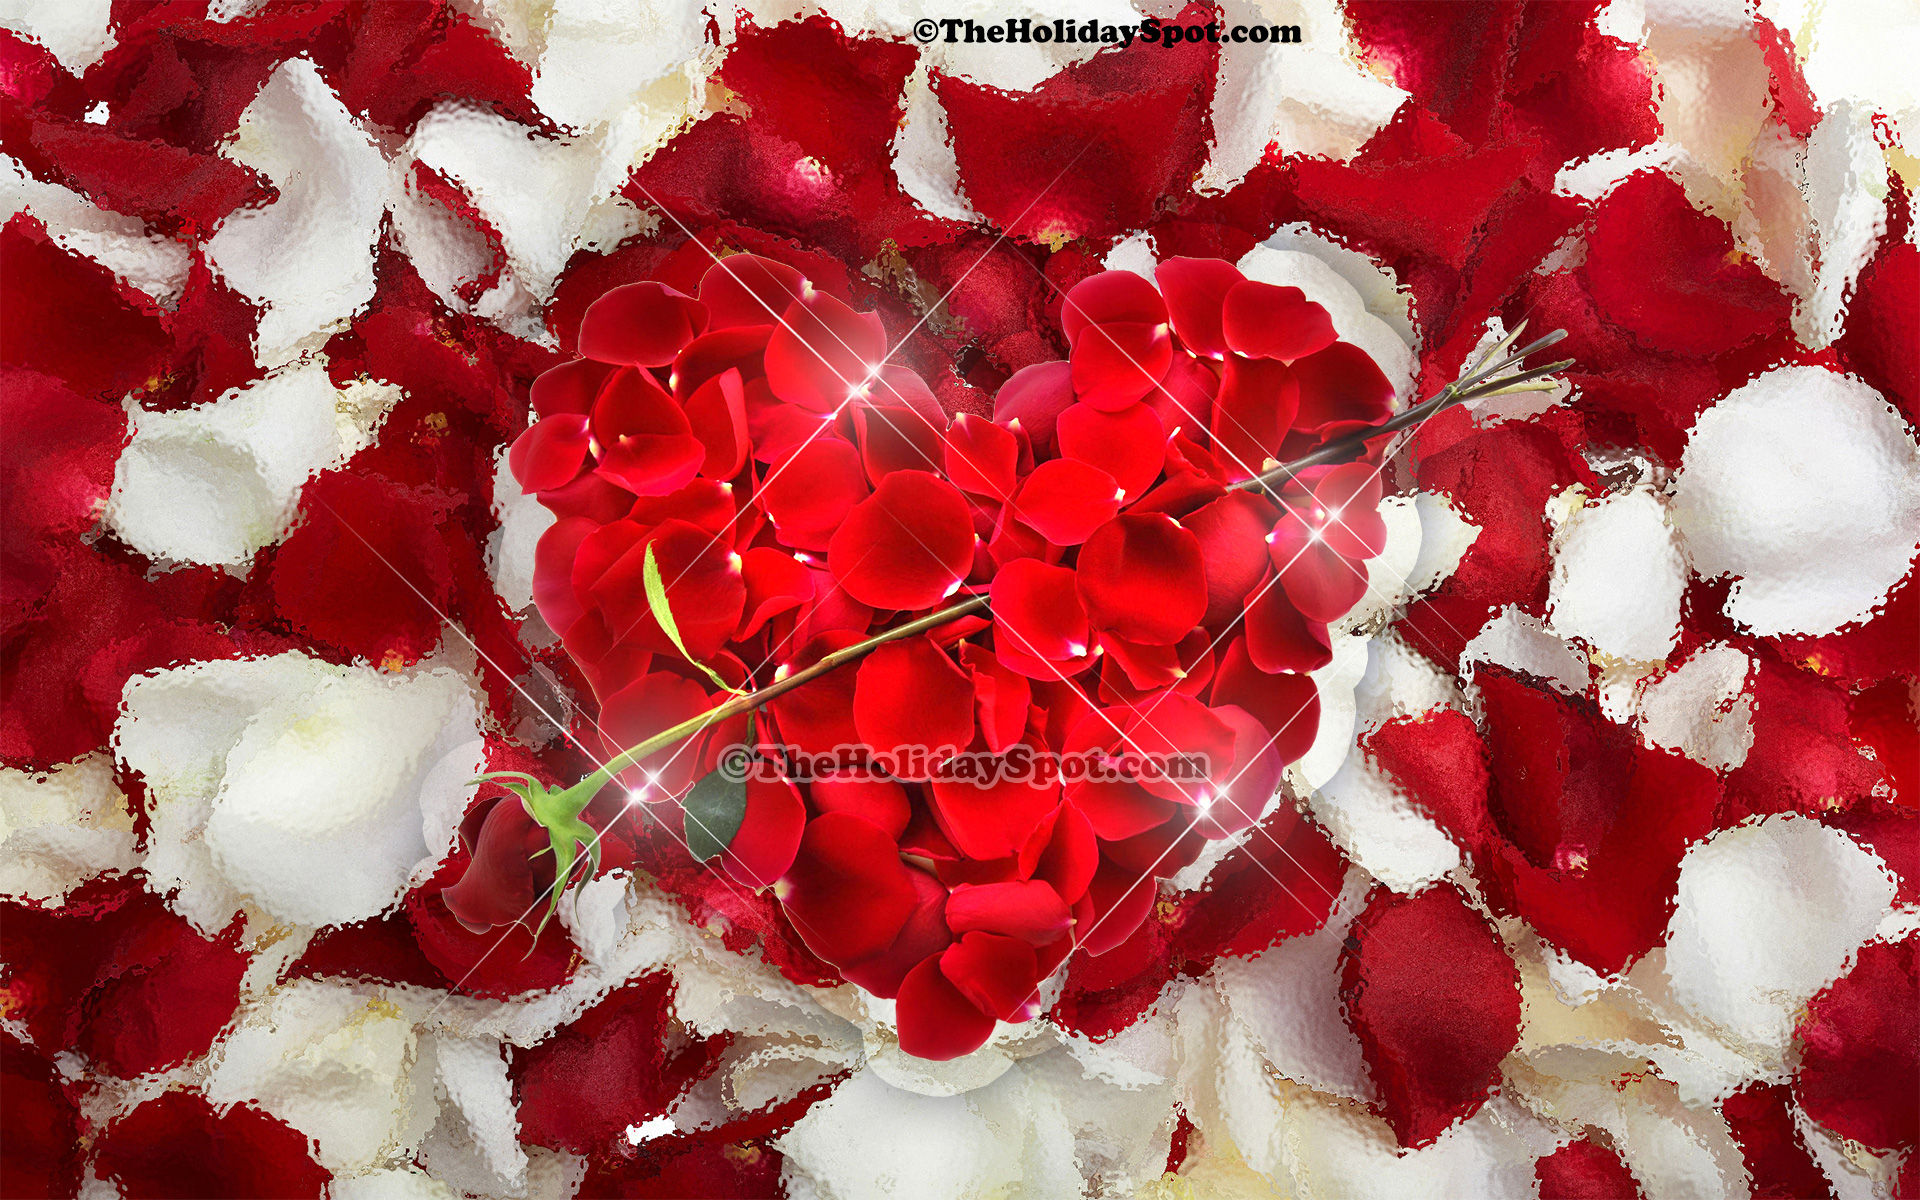 Day Background Themed On Love Showing A Heart Made Of Rose Petals